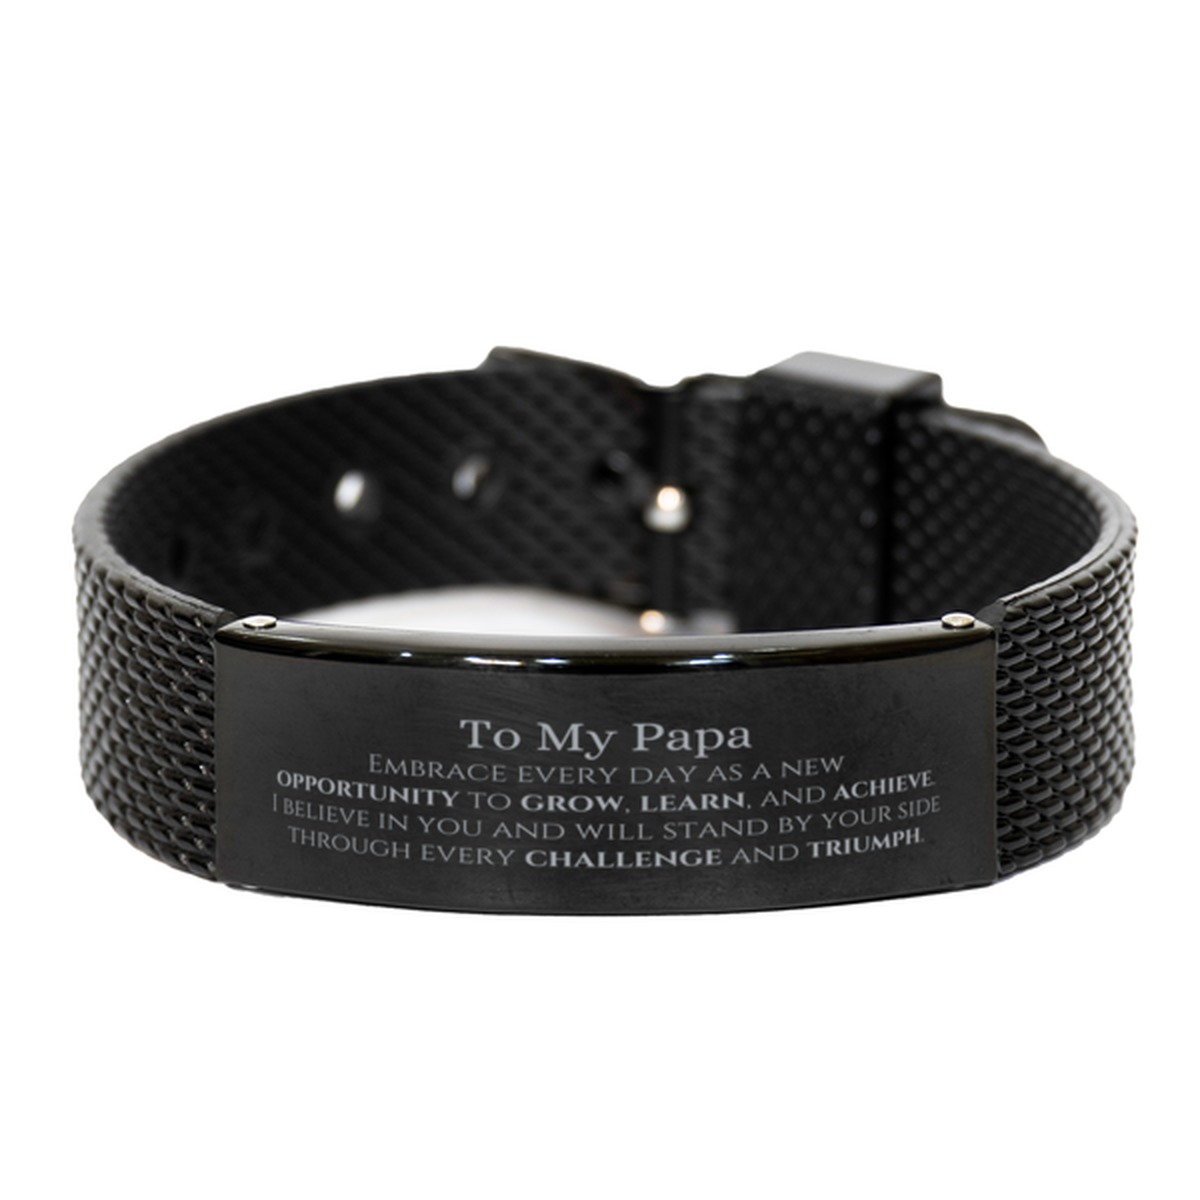 To My Papa Gifts, I believe in you and will stand by your side, Inspirational Black Shark Mesh Bracelet For Papa, Birthday Christmas Motivational Papa Gifts